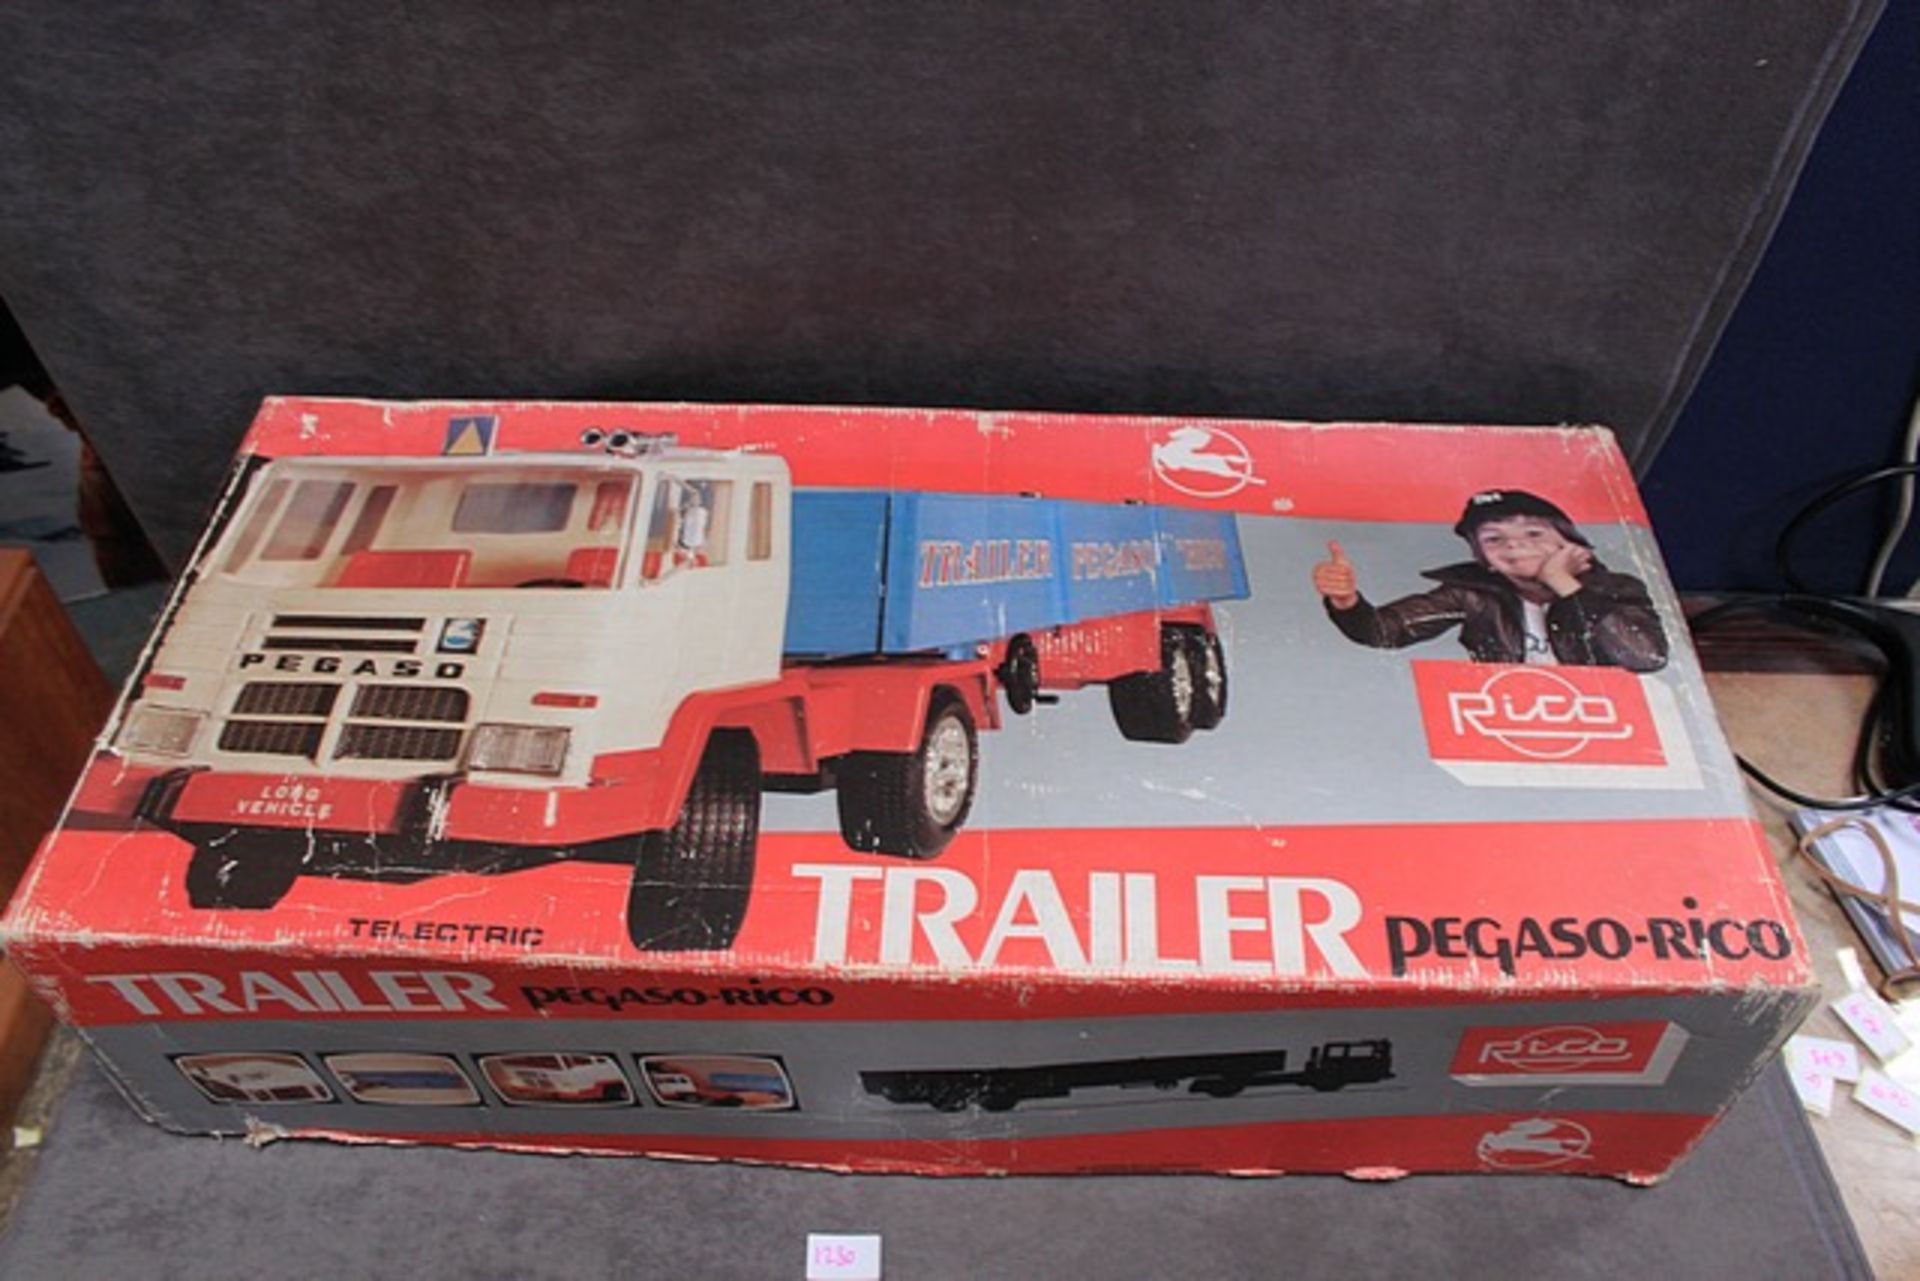 **Amazing** Rare Mint Rico Trailer Pegaso-Rico #121 Telectric with leaflets in box has shelf ware - Image 2 of 3